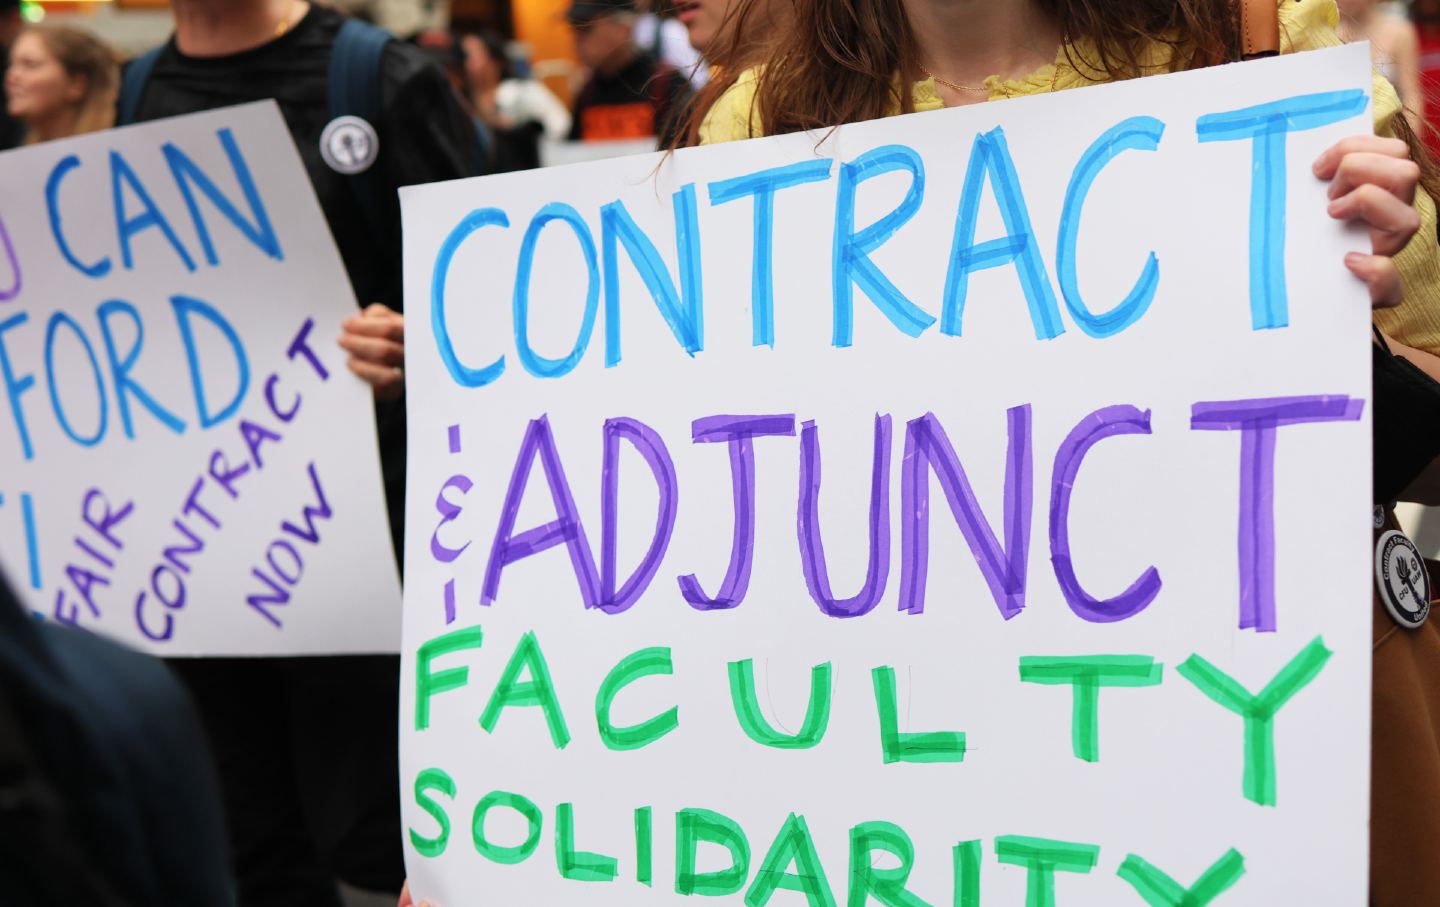 Members of NYU’s Adjunct Faculty union march near Union Square. In the photo, one member holds a sign reading 